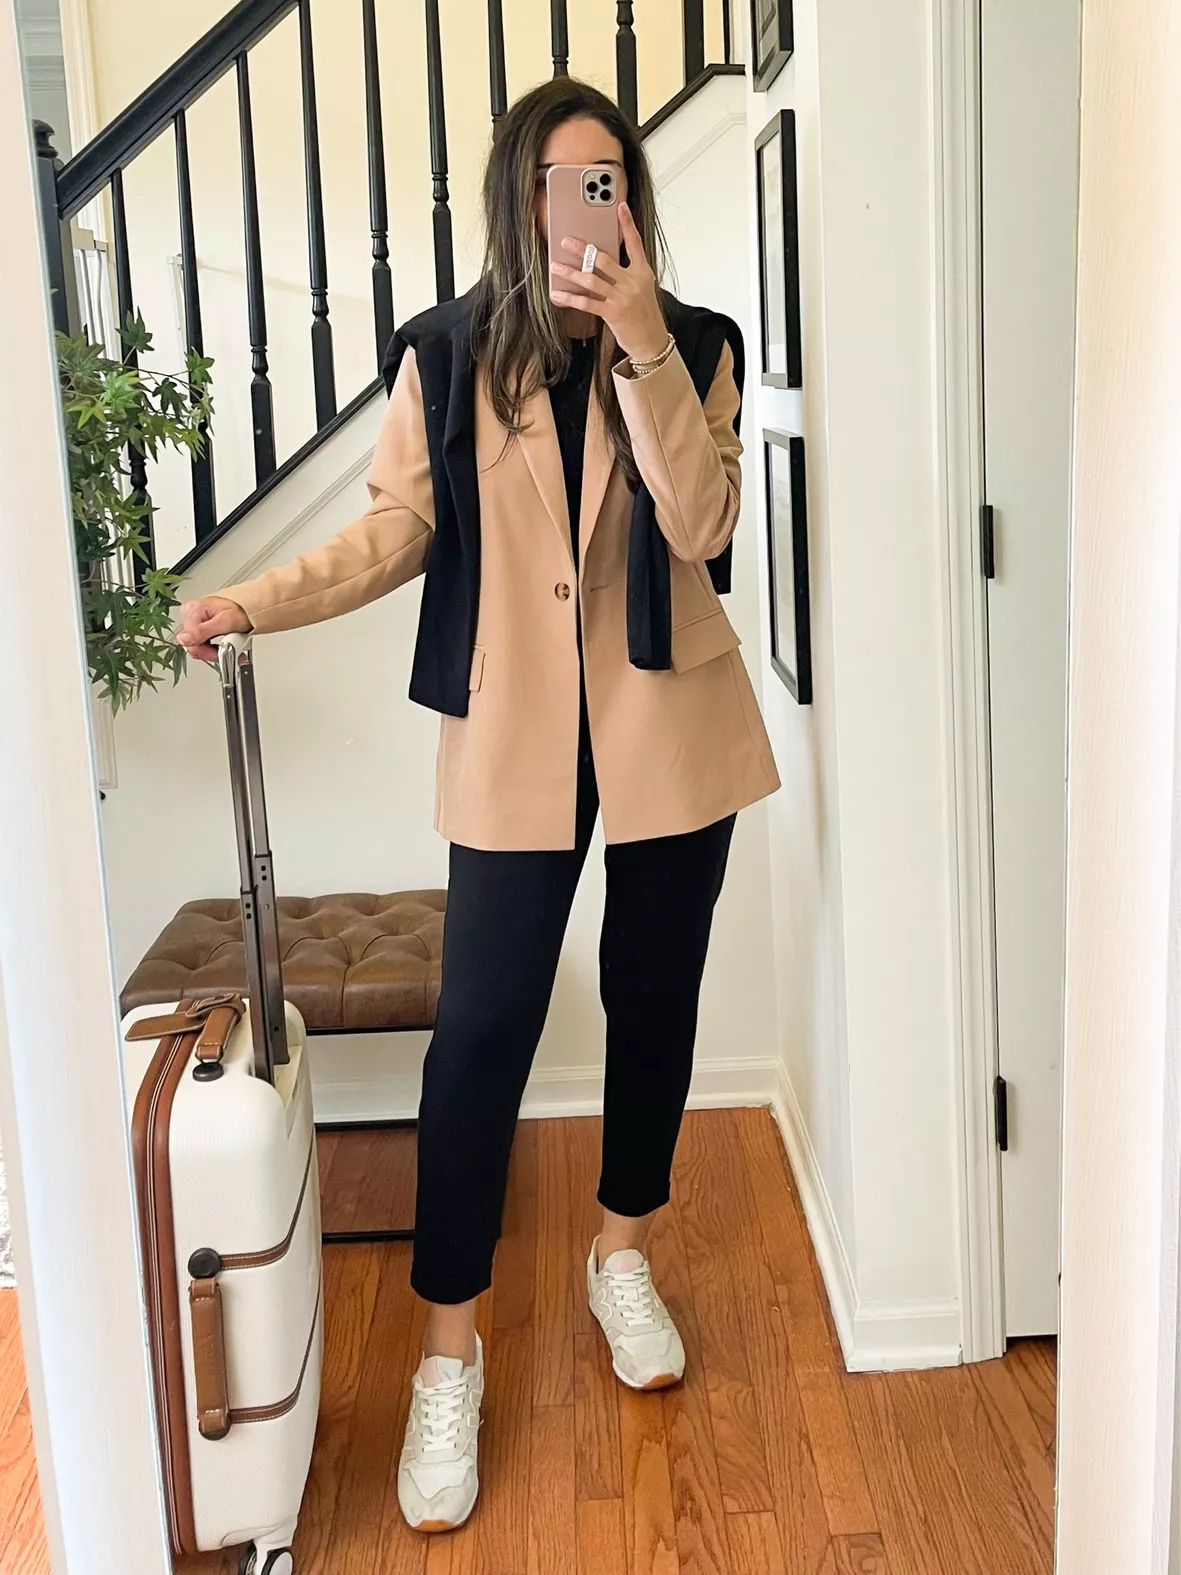 Comfy Travel fit 101, Gallery posted by nicoletta